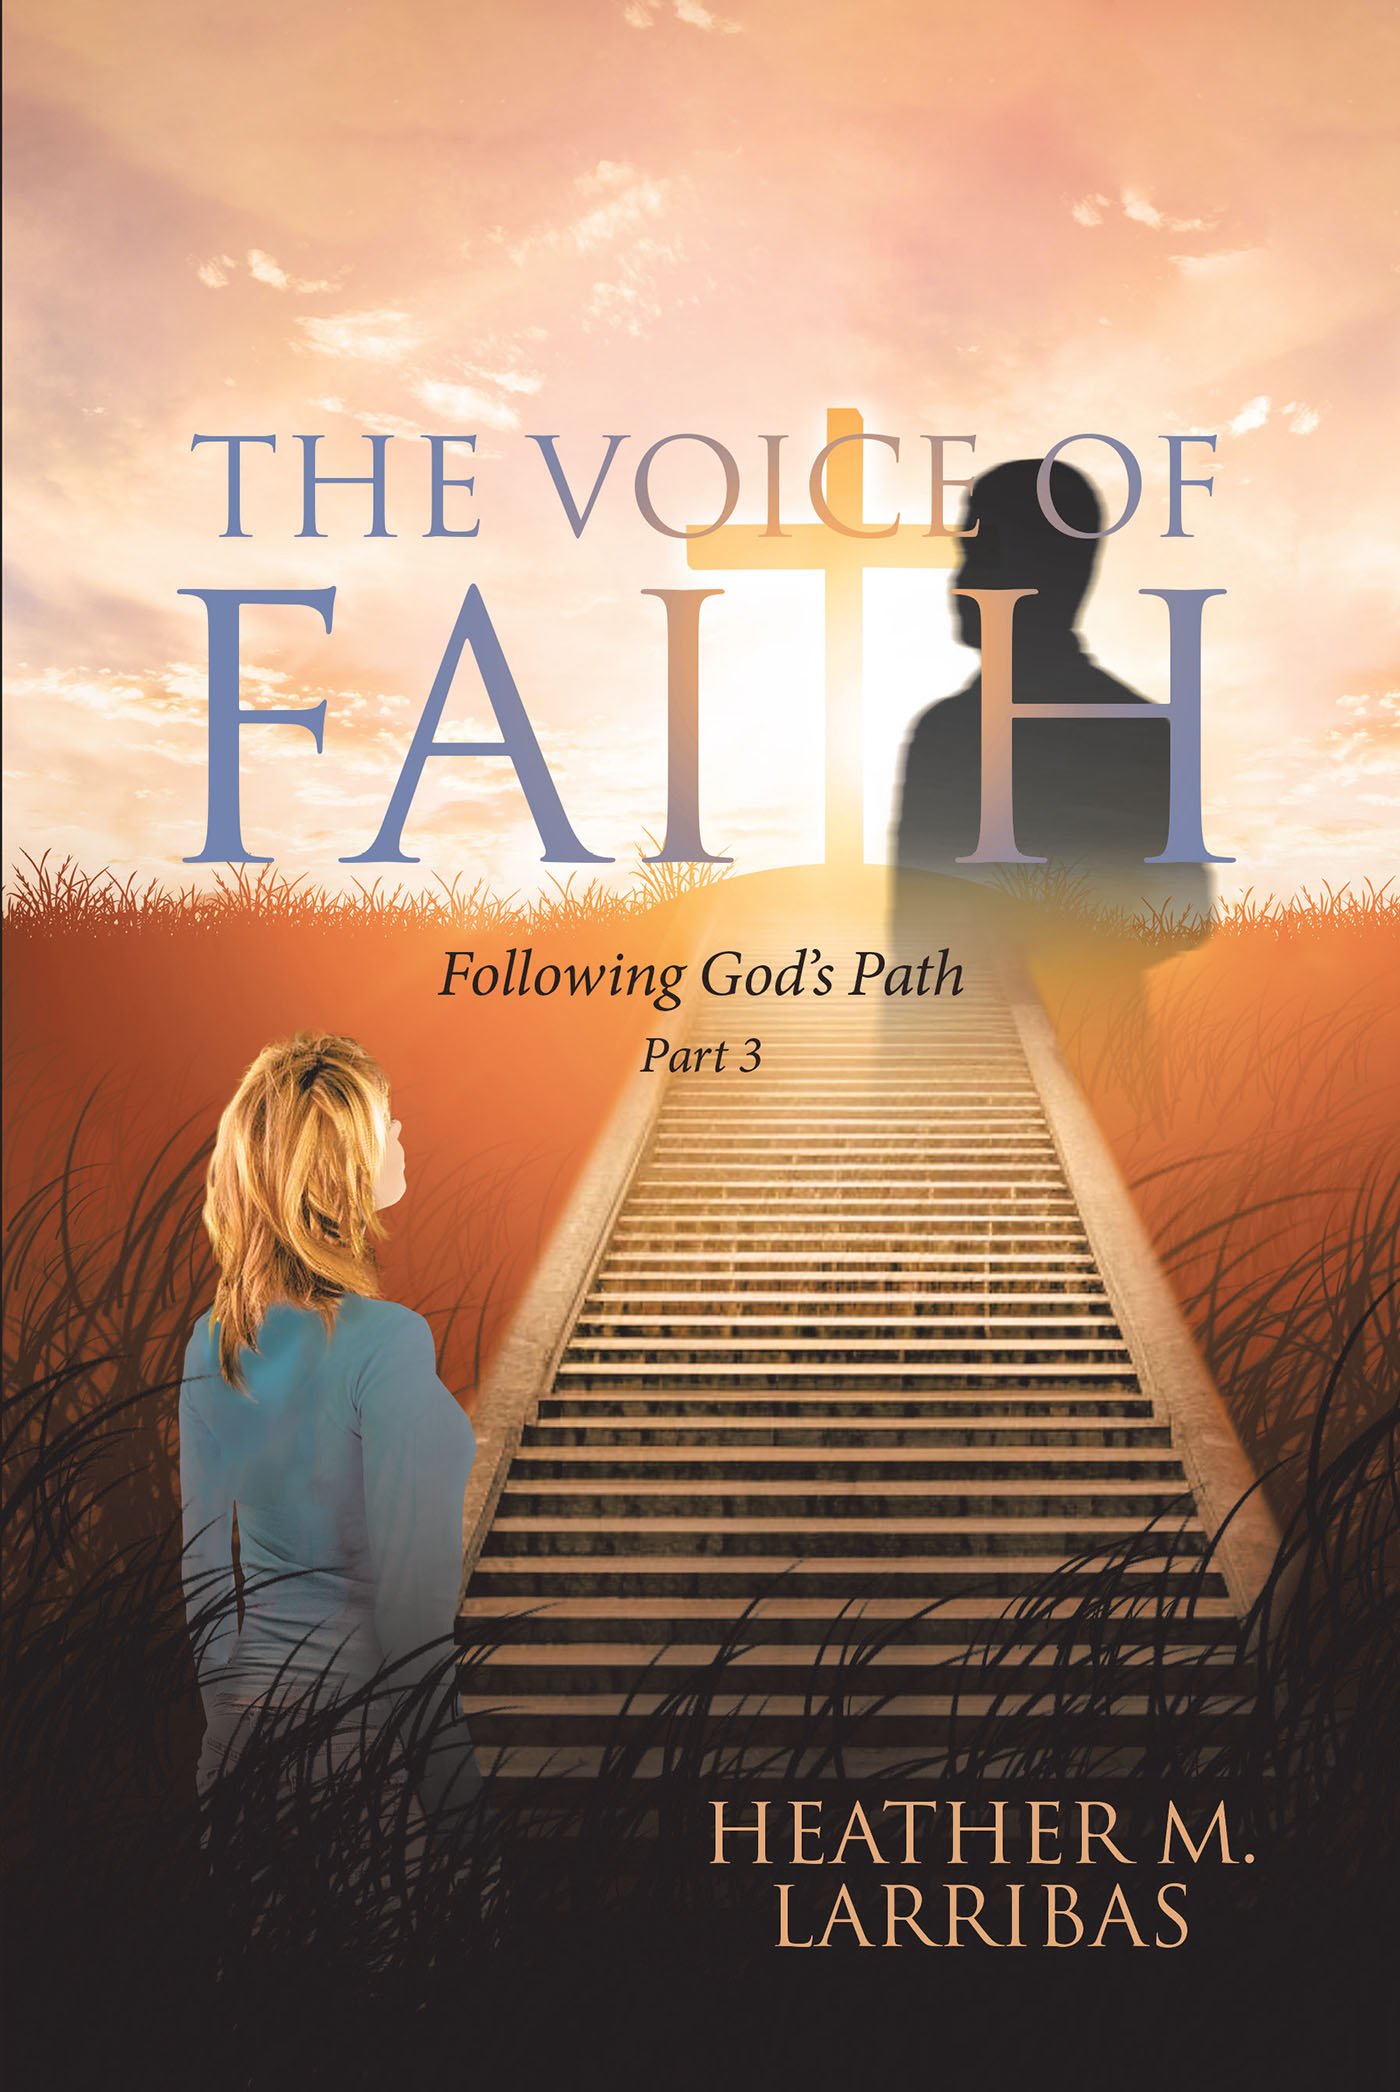 Heather M. Larribas’s Newly Released "The Voice of Faith: Following God’s Path" is an Open Discussion of the Challenges and Blessings of Following God’s Plan